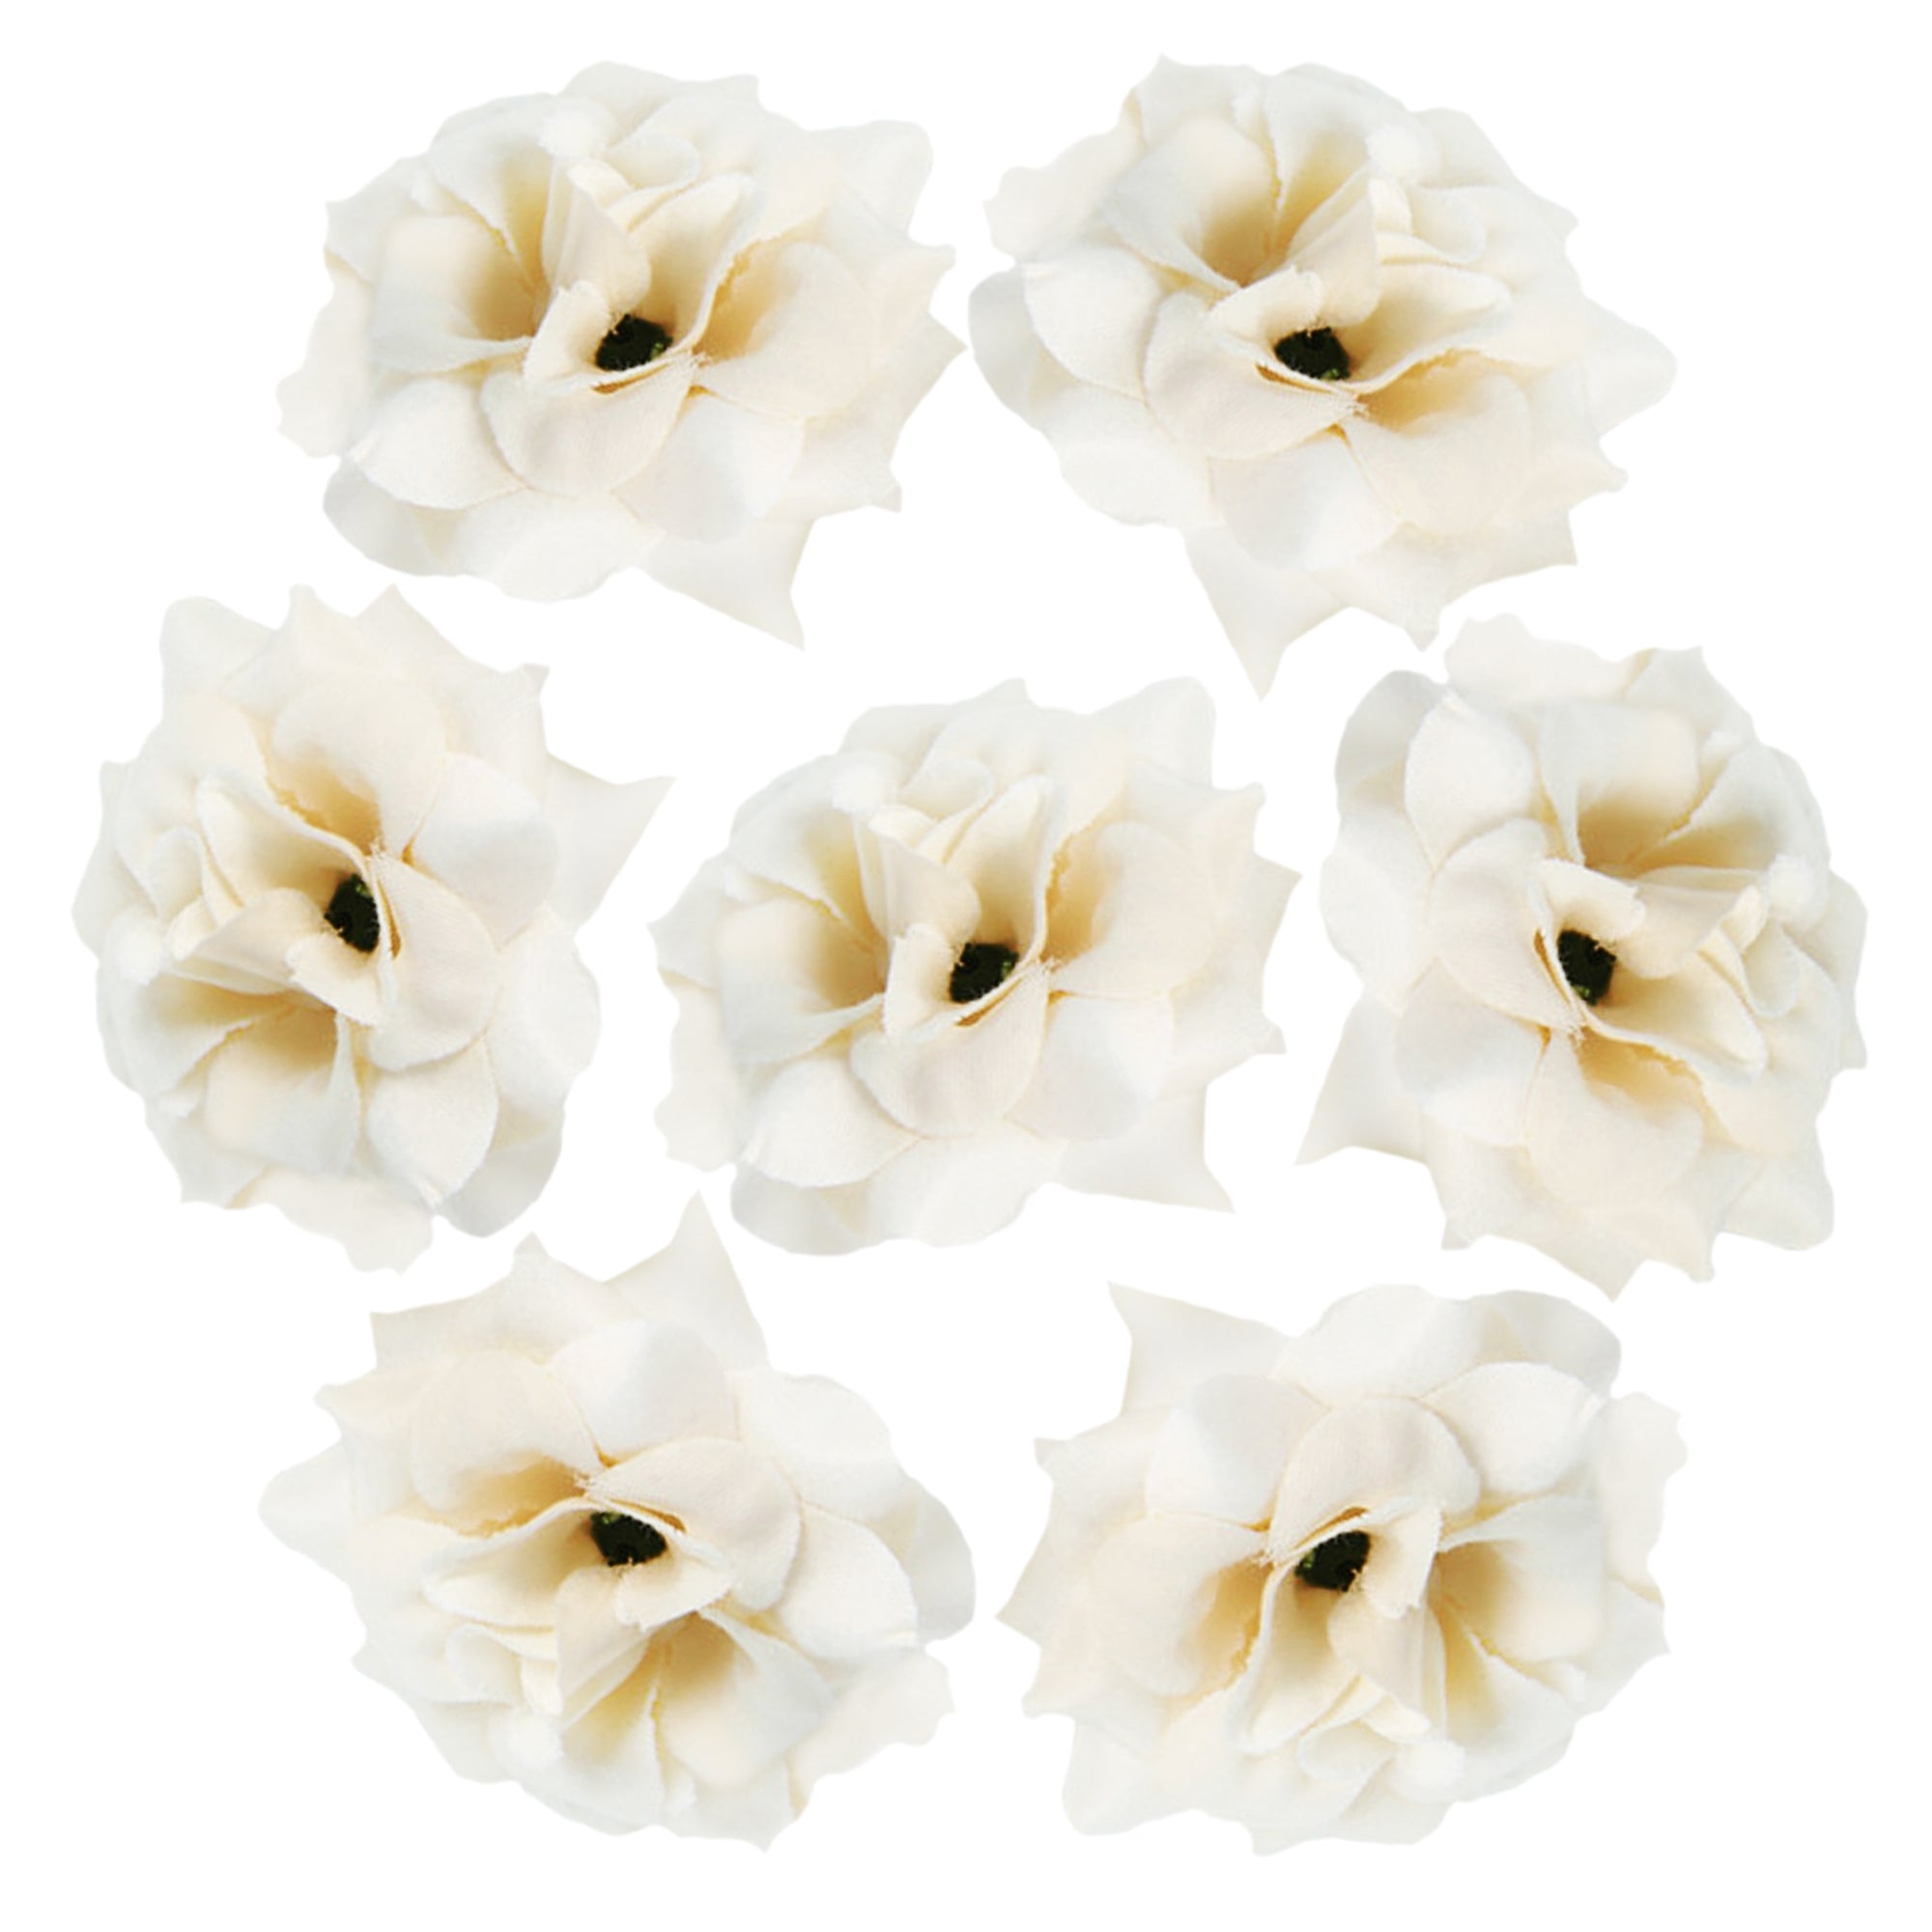 Mini White Silk Artificial Flower Heads for Crafts, Decorations (2